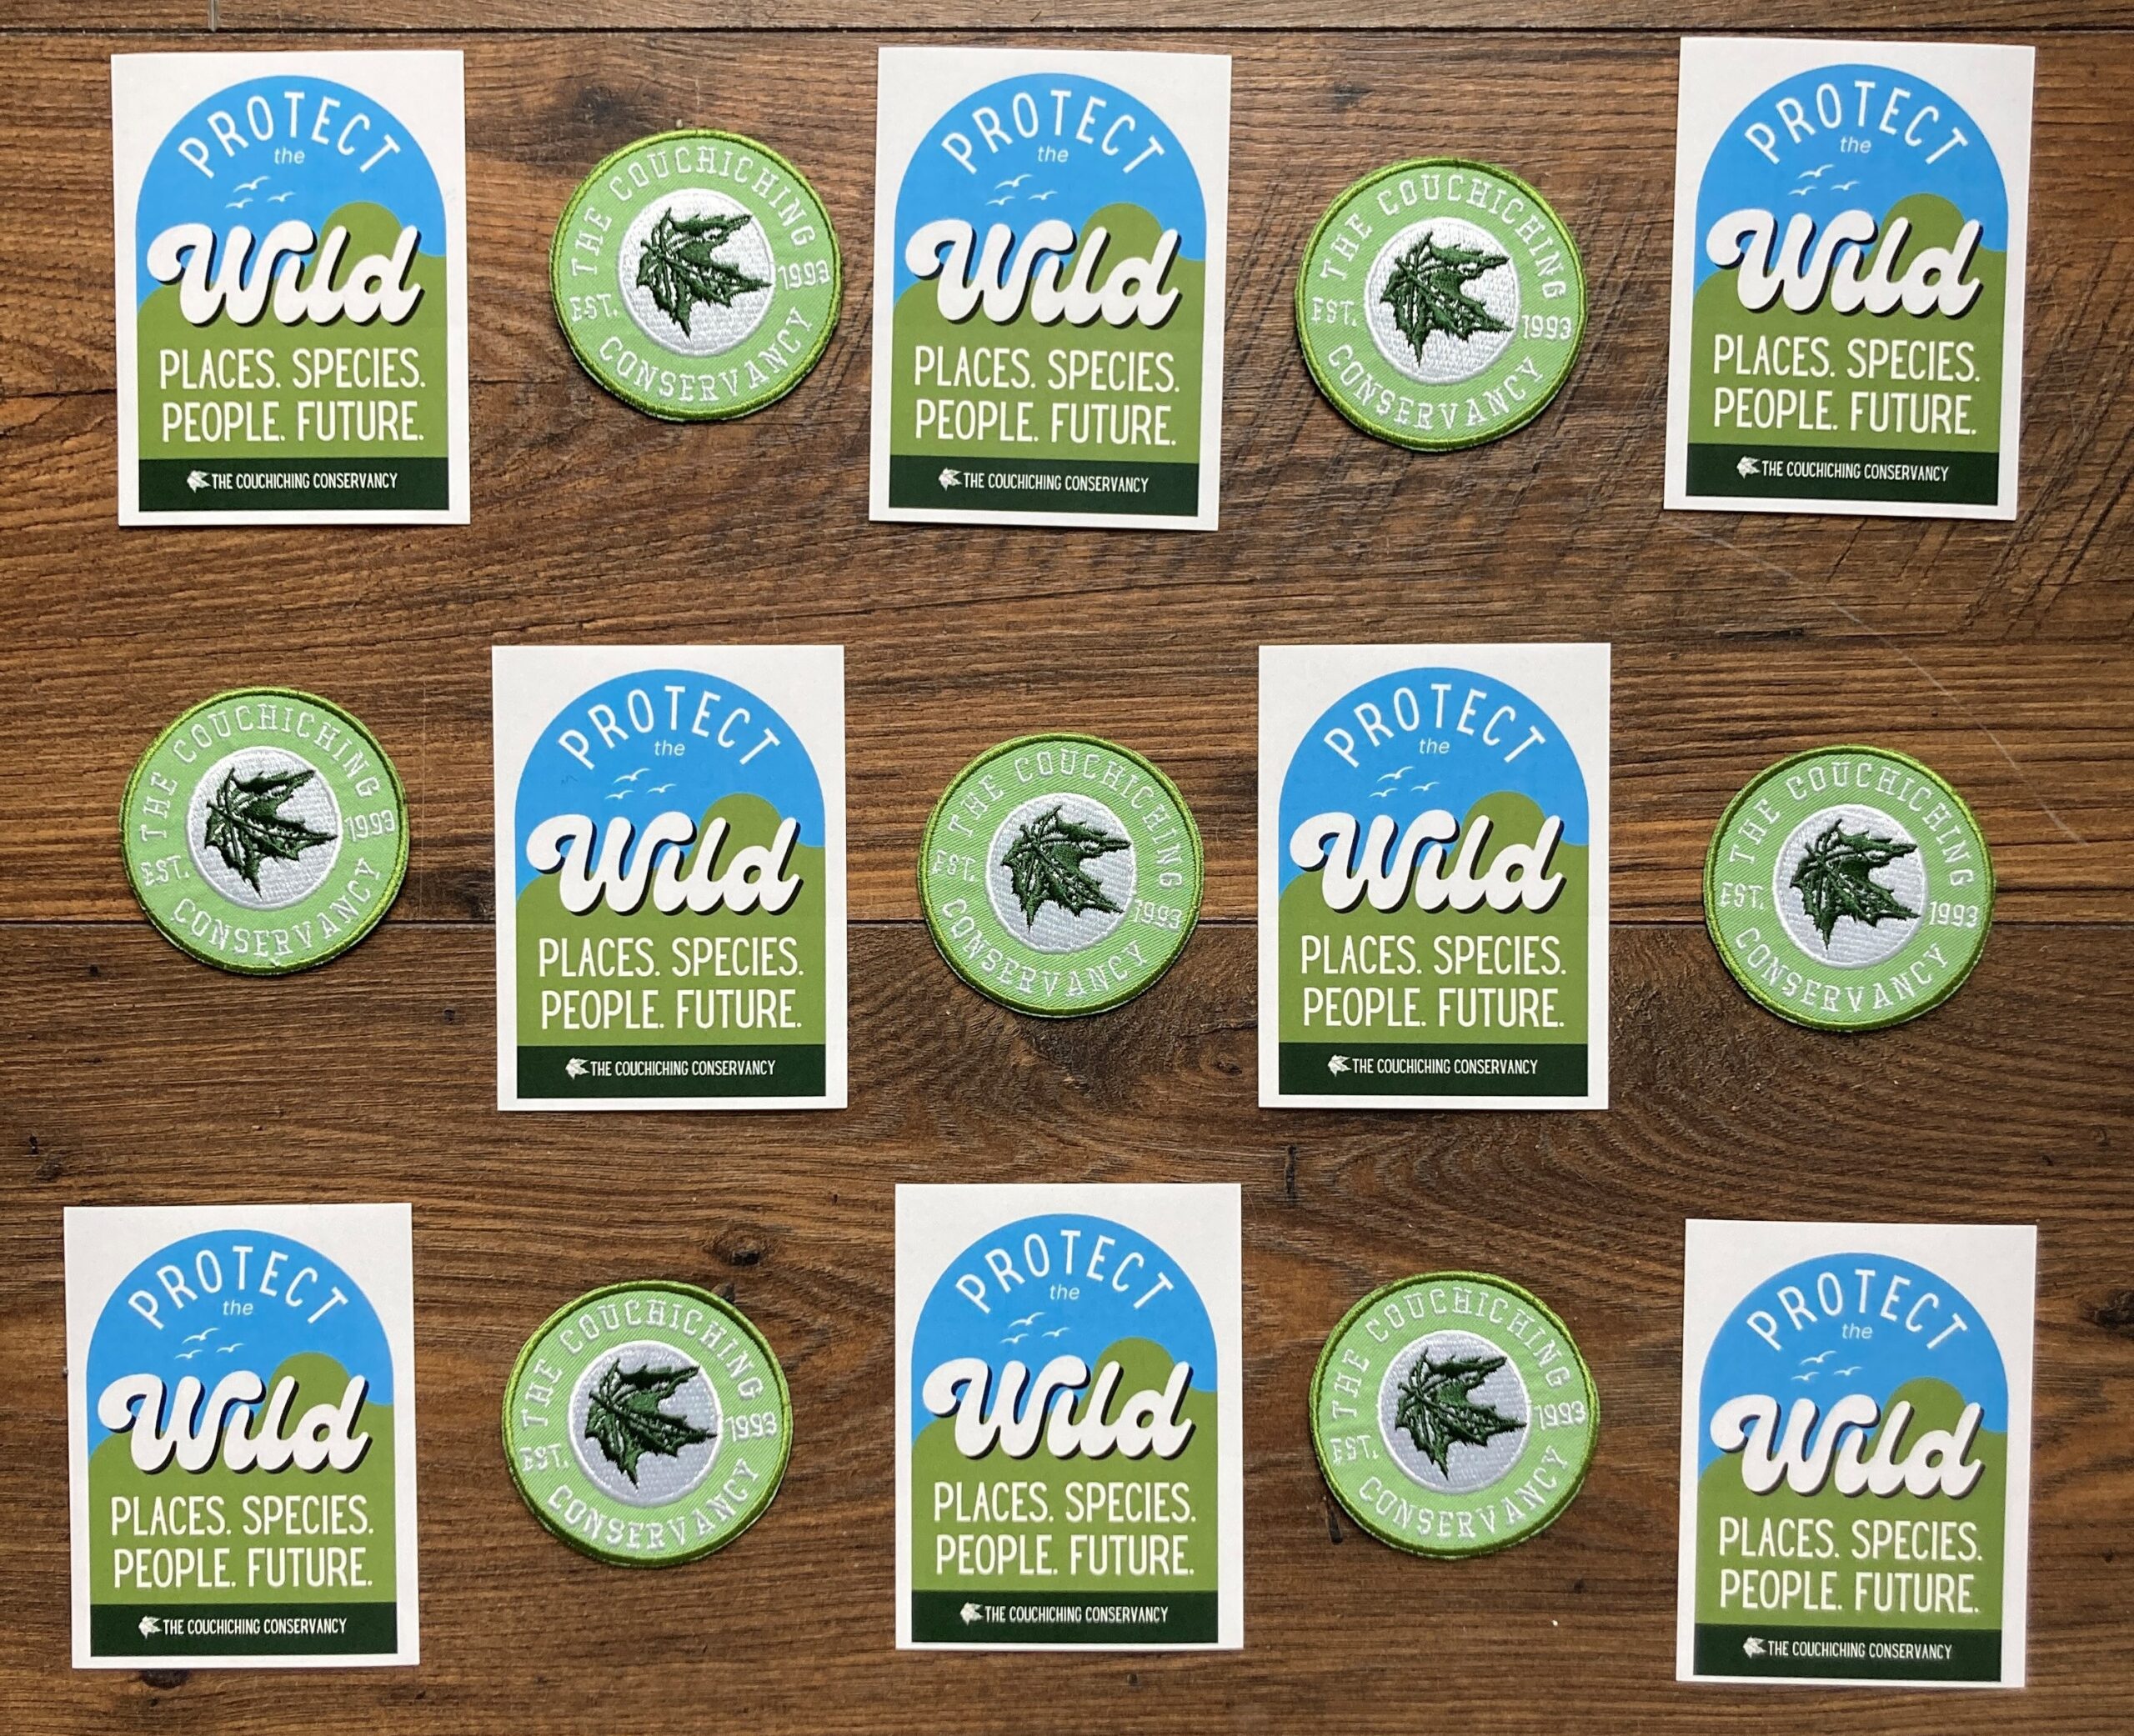 photo of car stickers and clothing patches for protecting the wild